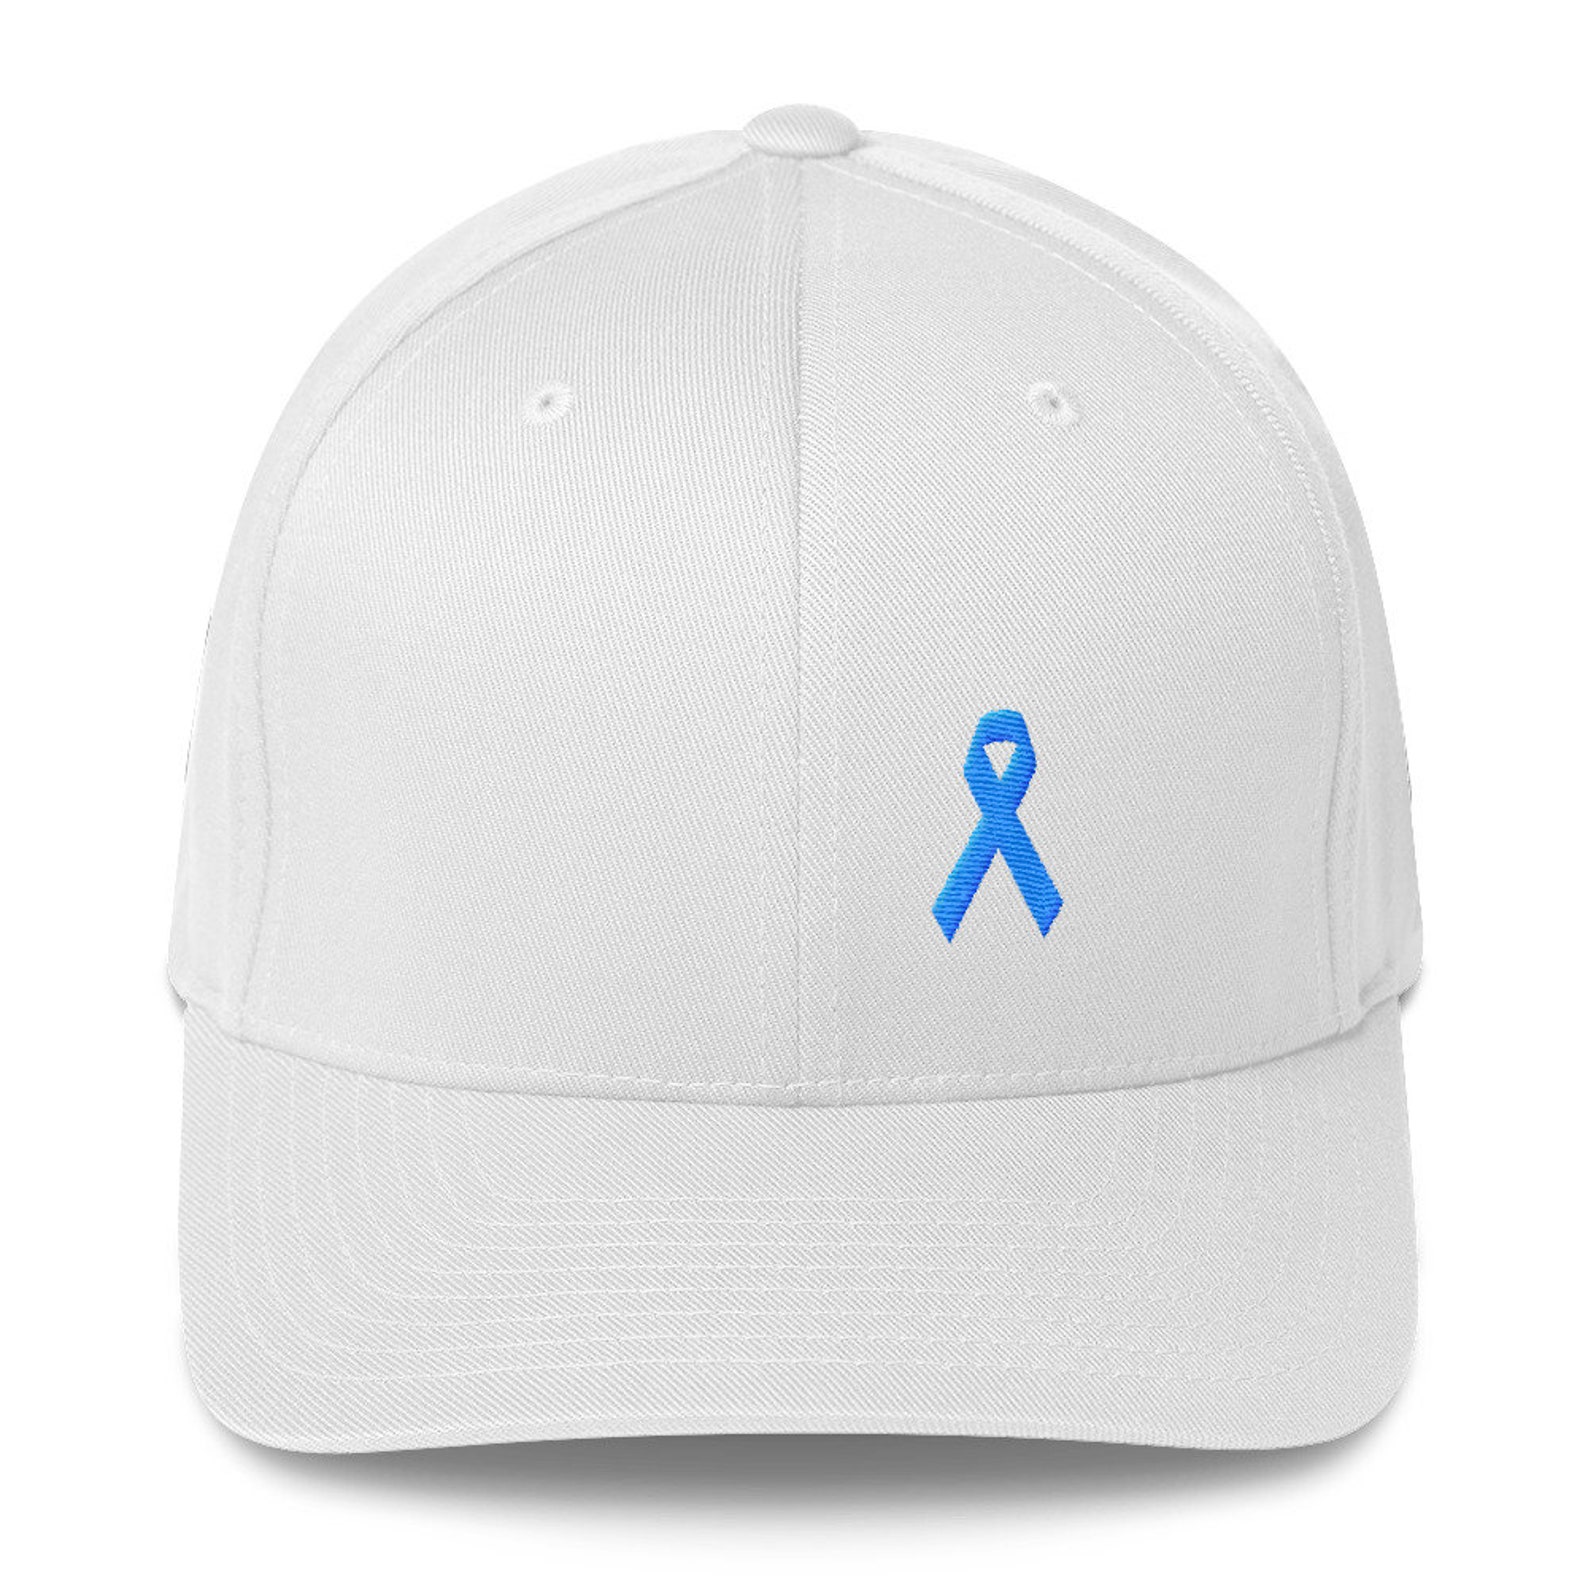 Prostate Cancer Awareness Fitted Hat Light Blue Ribbon Fitted Baseball ...